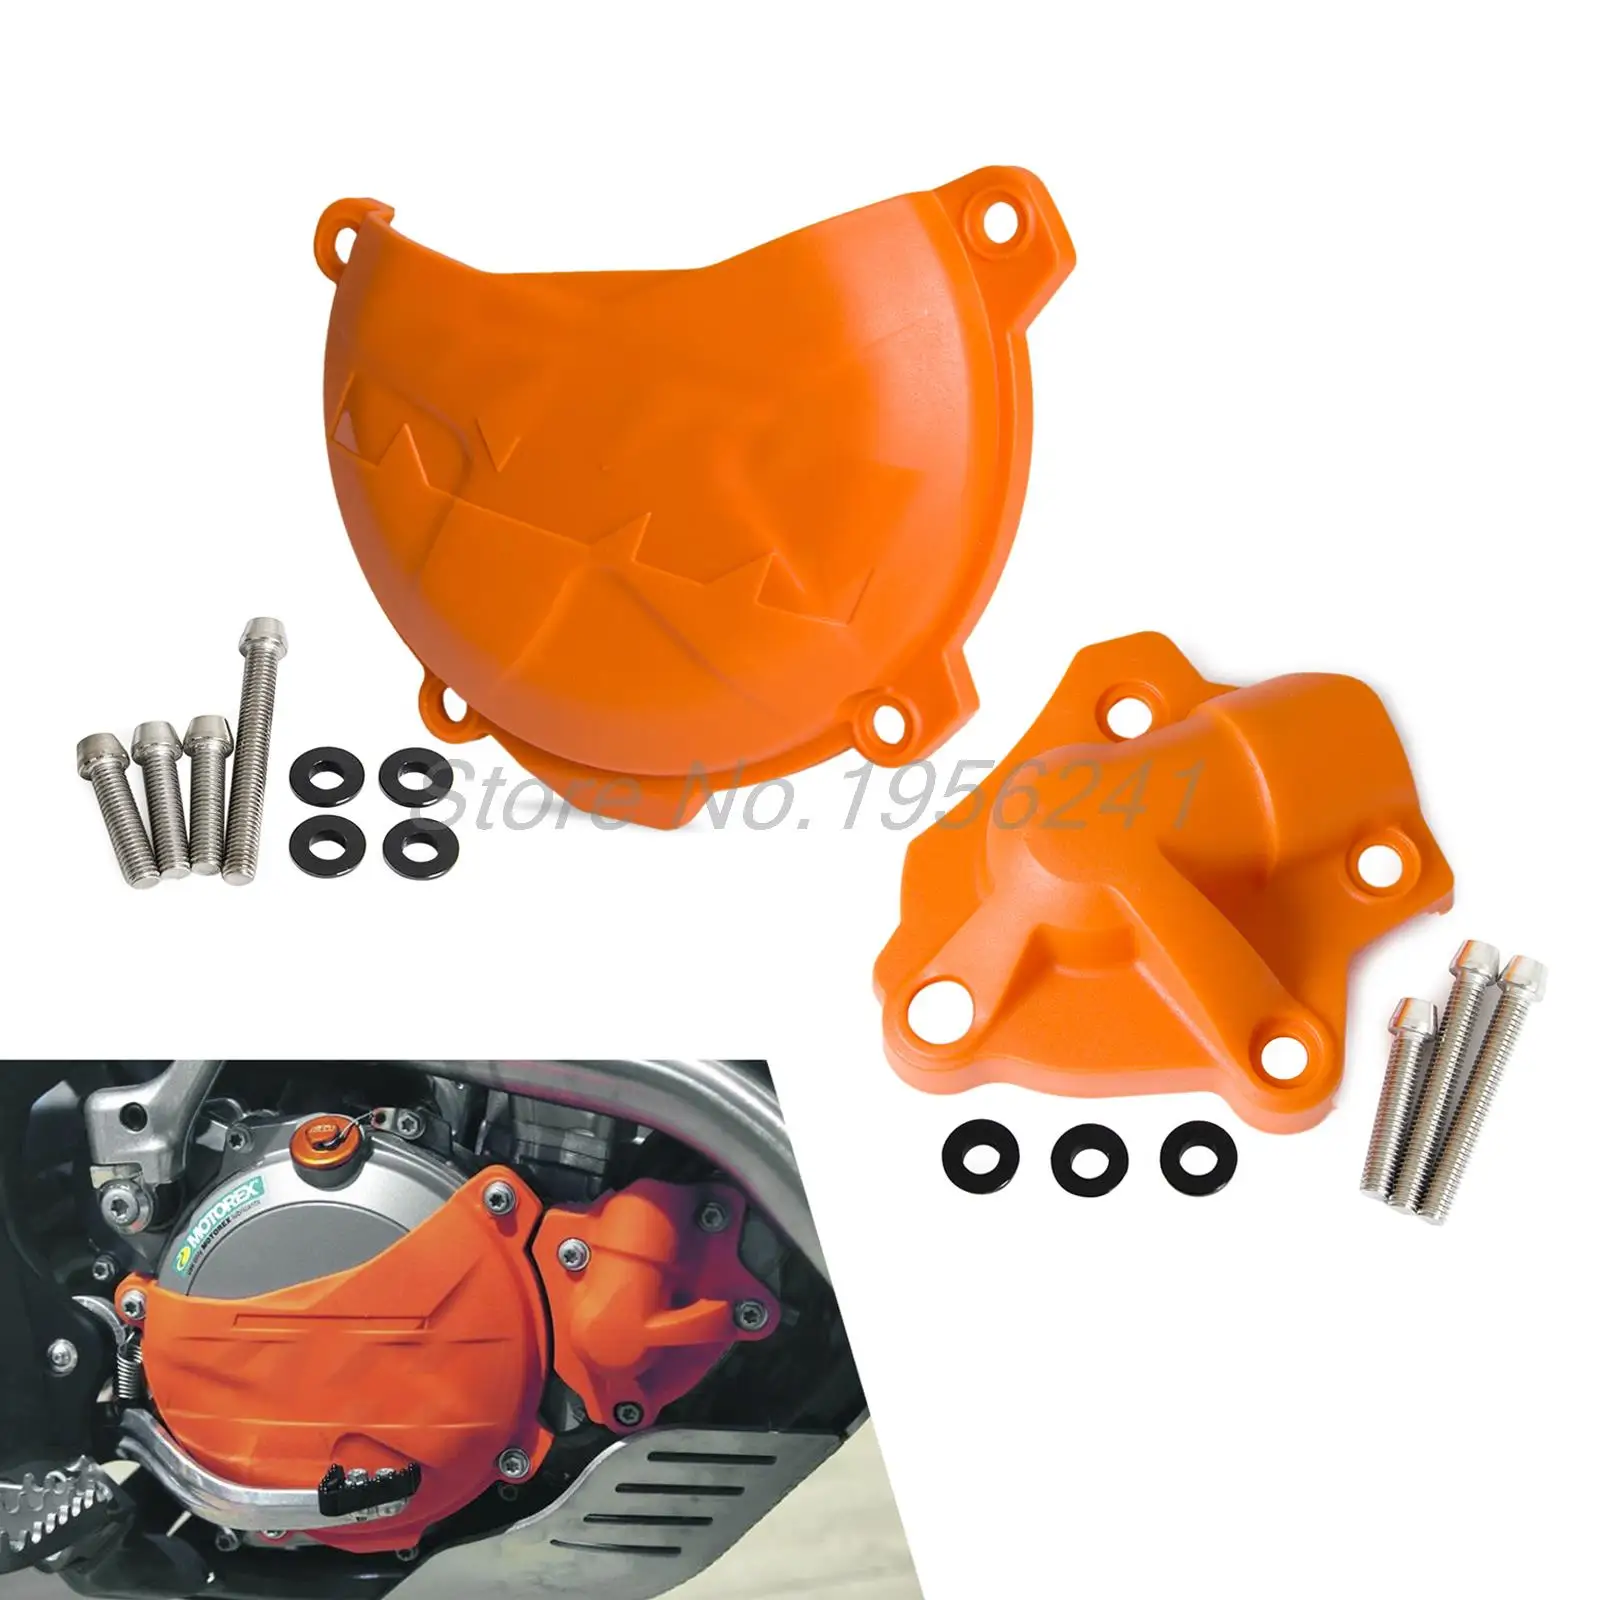 Clutch Cover Protection Cover Water Pump Cover Protector for KTM 250 EXC-F-2016